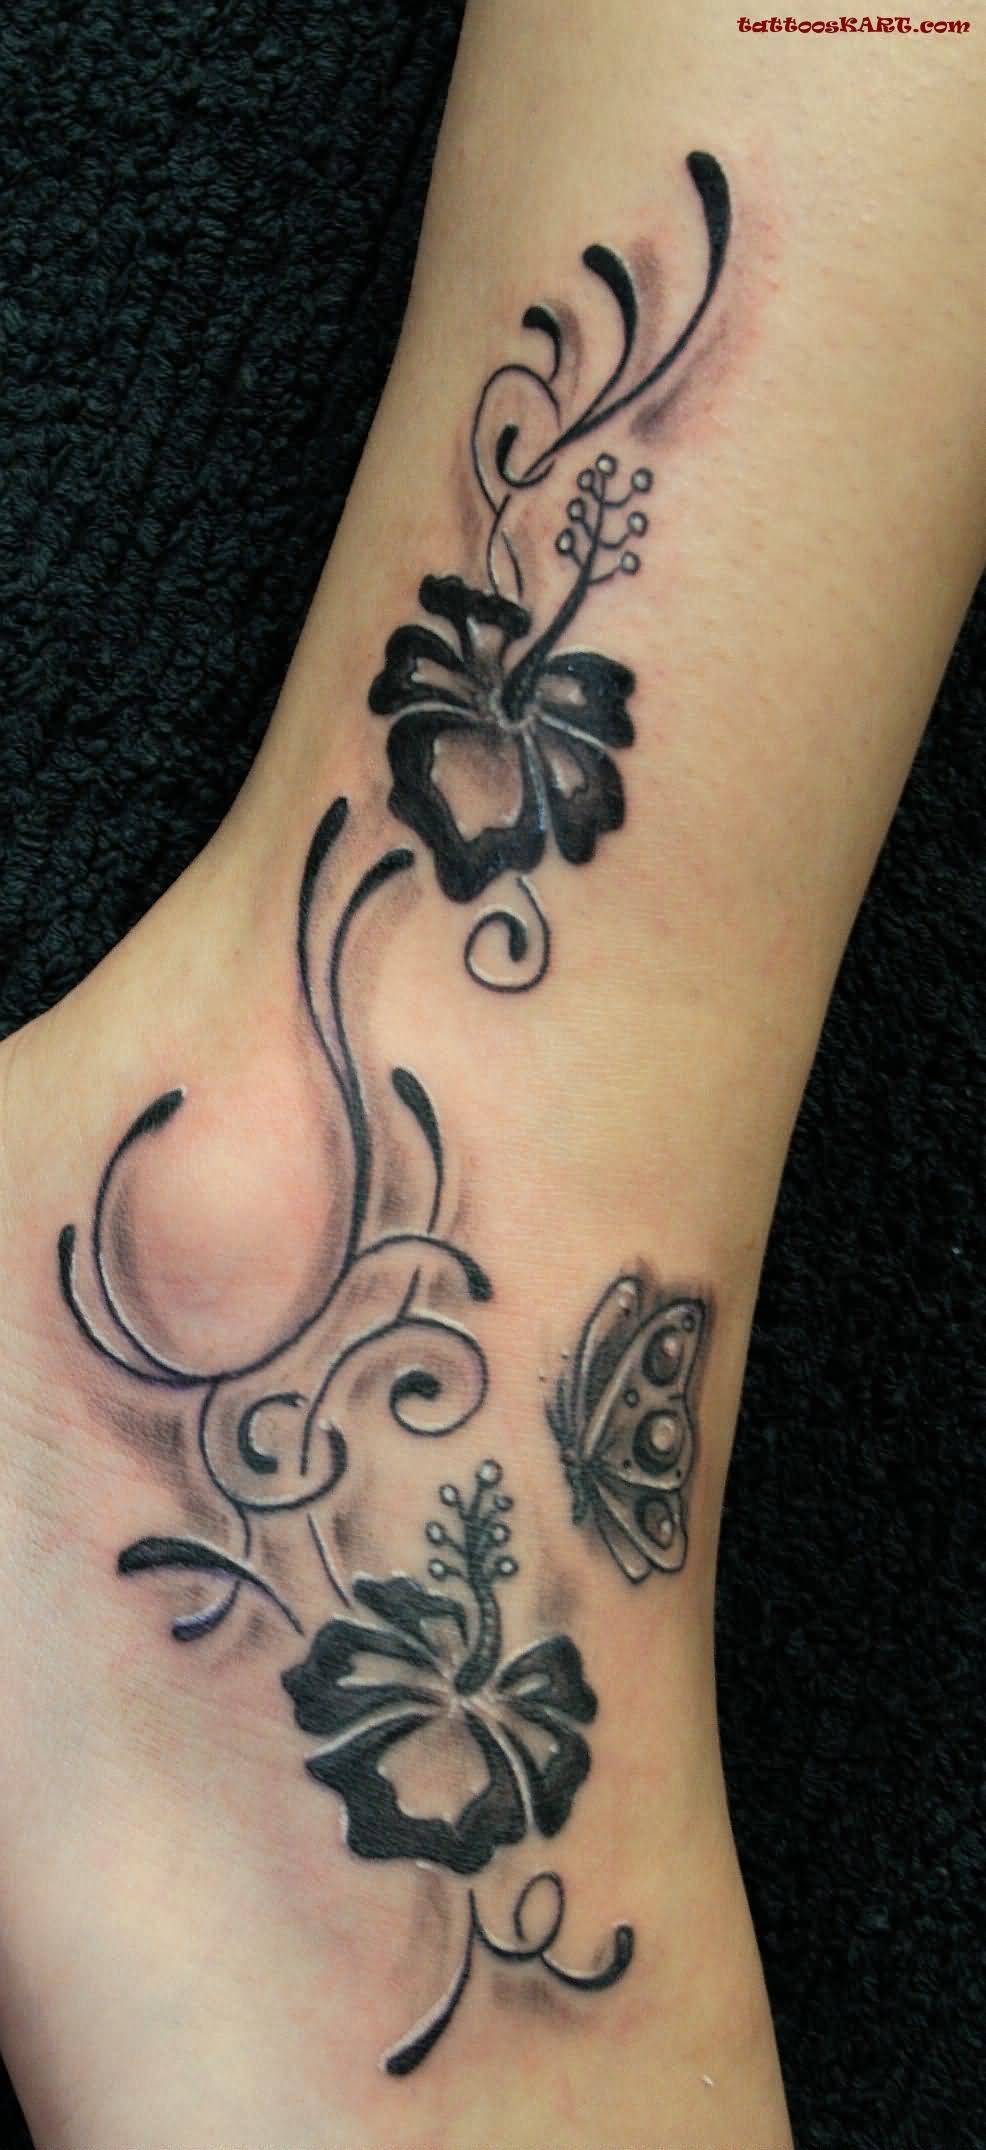 Lovely Hibiscus Flowers With Butterfly Tattoo On Foot And Ankle